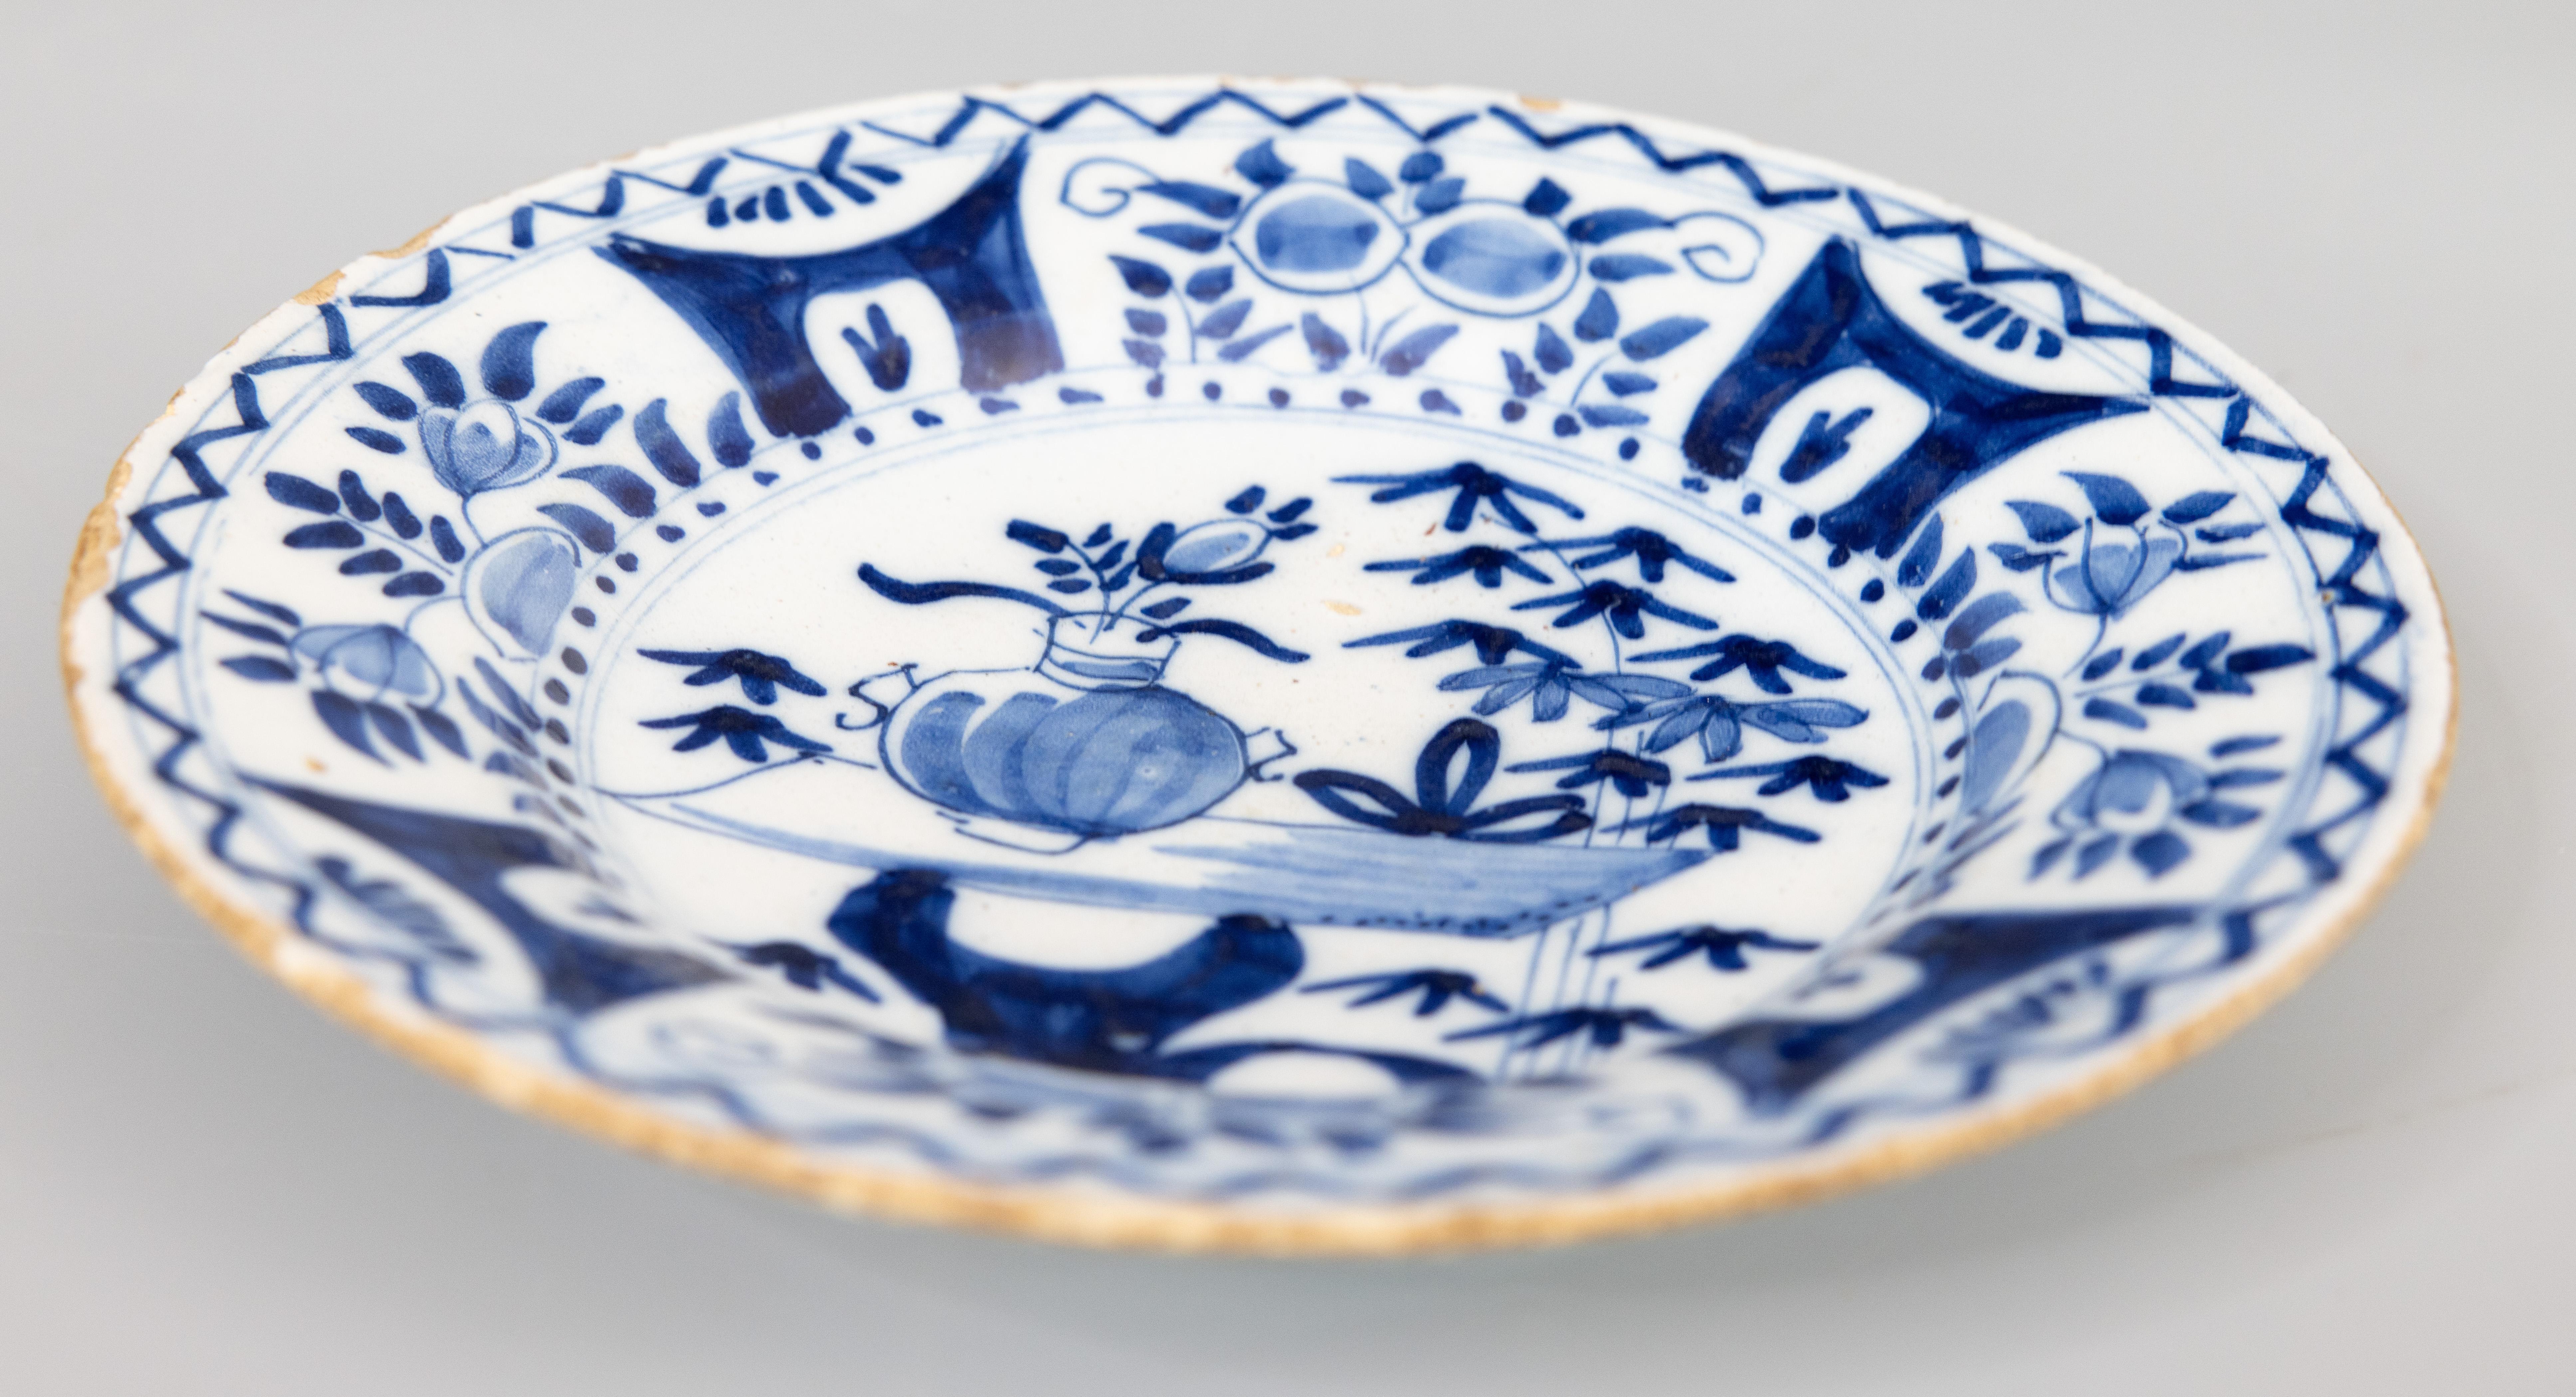 Antique 18th Century Dutch Delft Chinoiserie Floral Plate In Good Condition For Sale In Pearland, TX